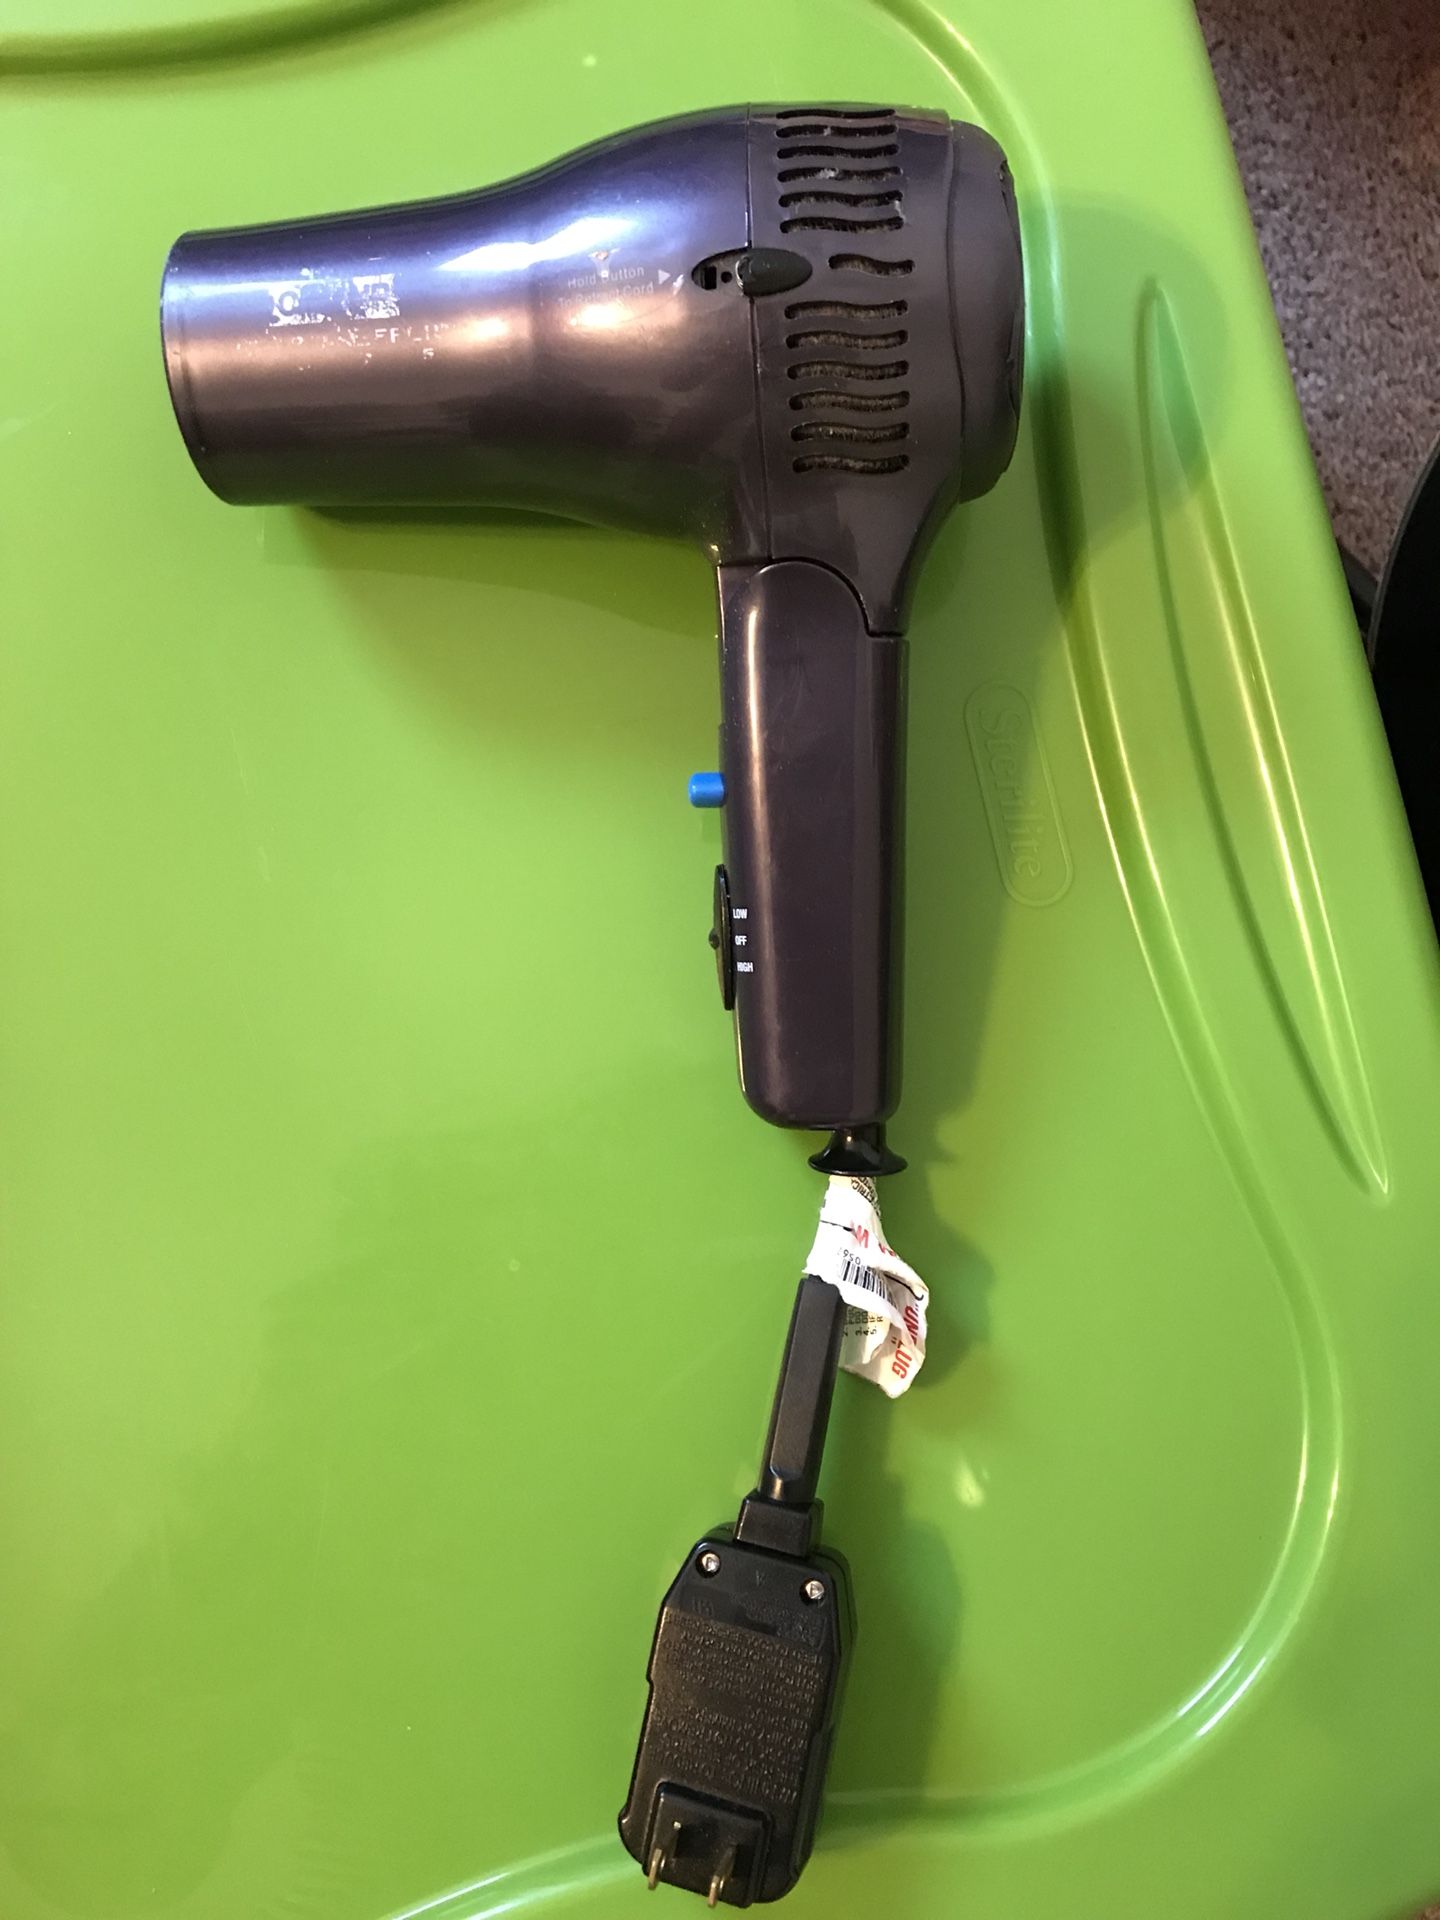 Hair dryer with retractable cord